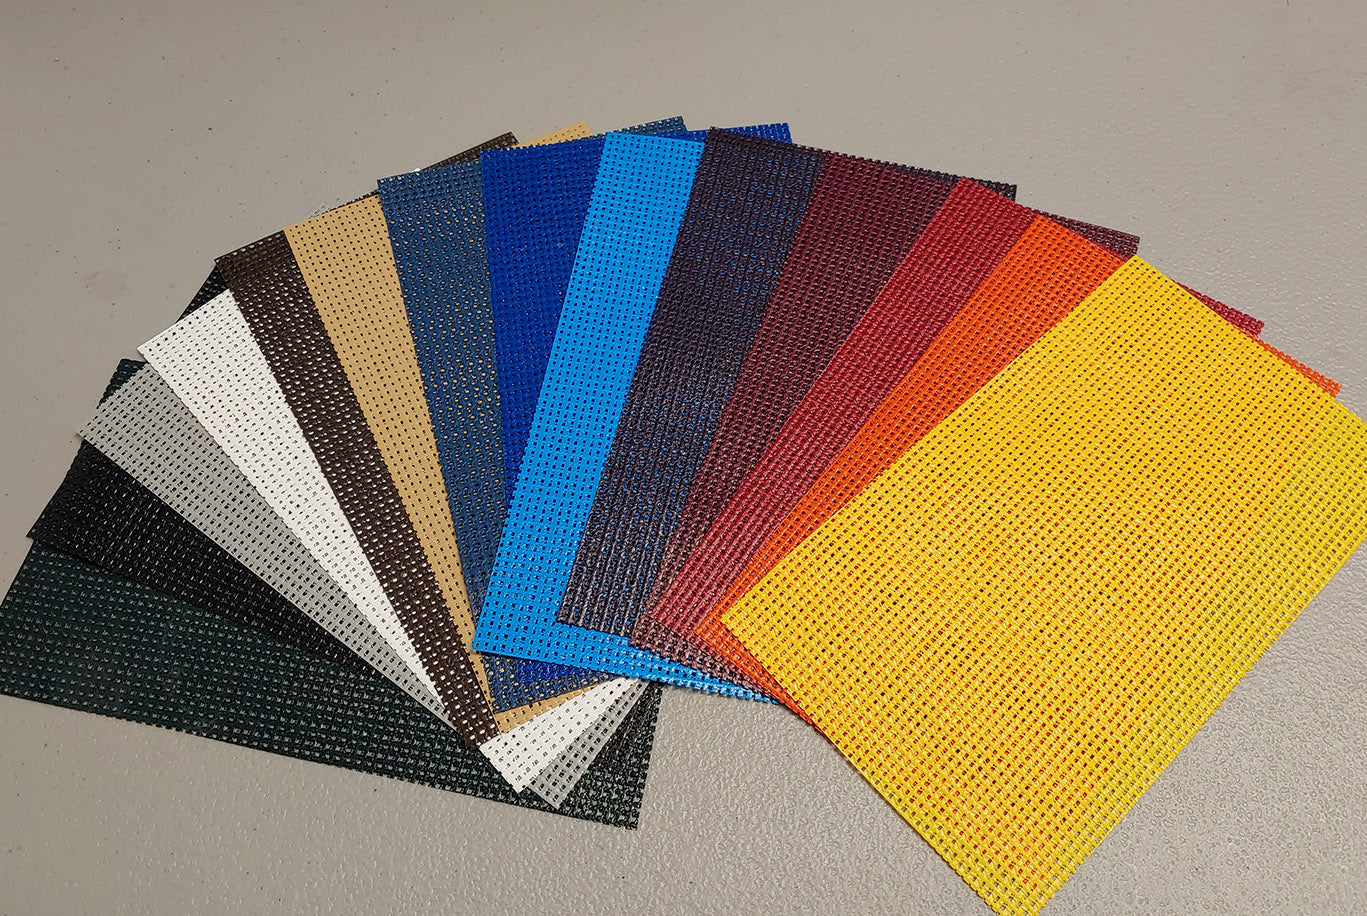 A group of different colored sheets of paper.